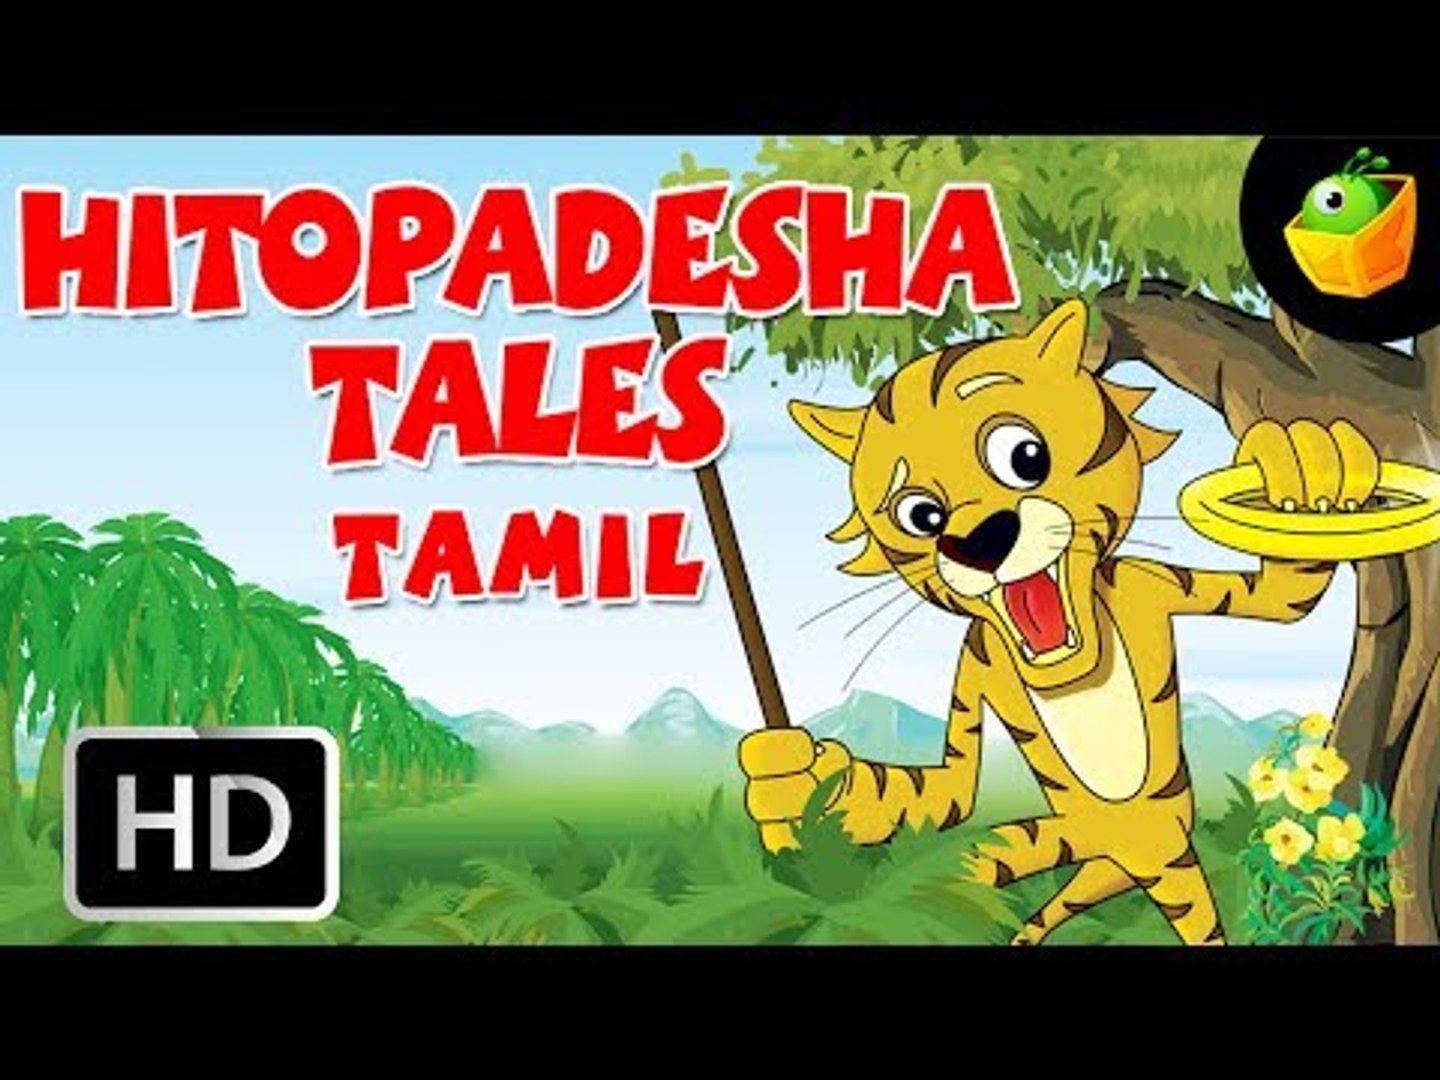 Hitopadesha Tales Full Stories In Tamil (HD) - Compilation of Cartoon/ Animated Stories For Kids - video Dailymotion